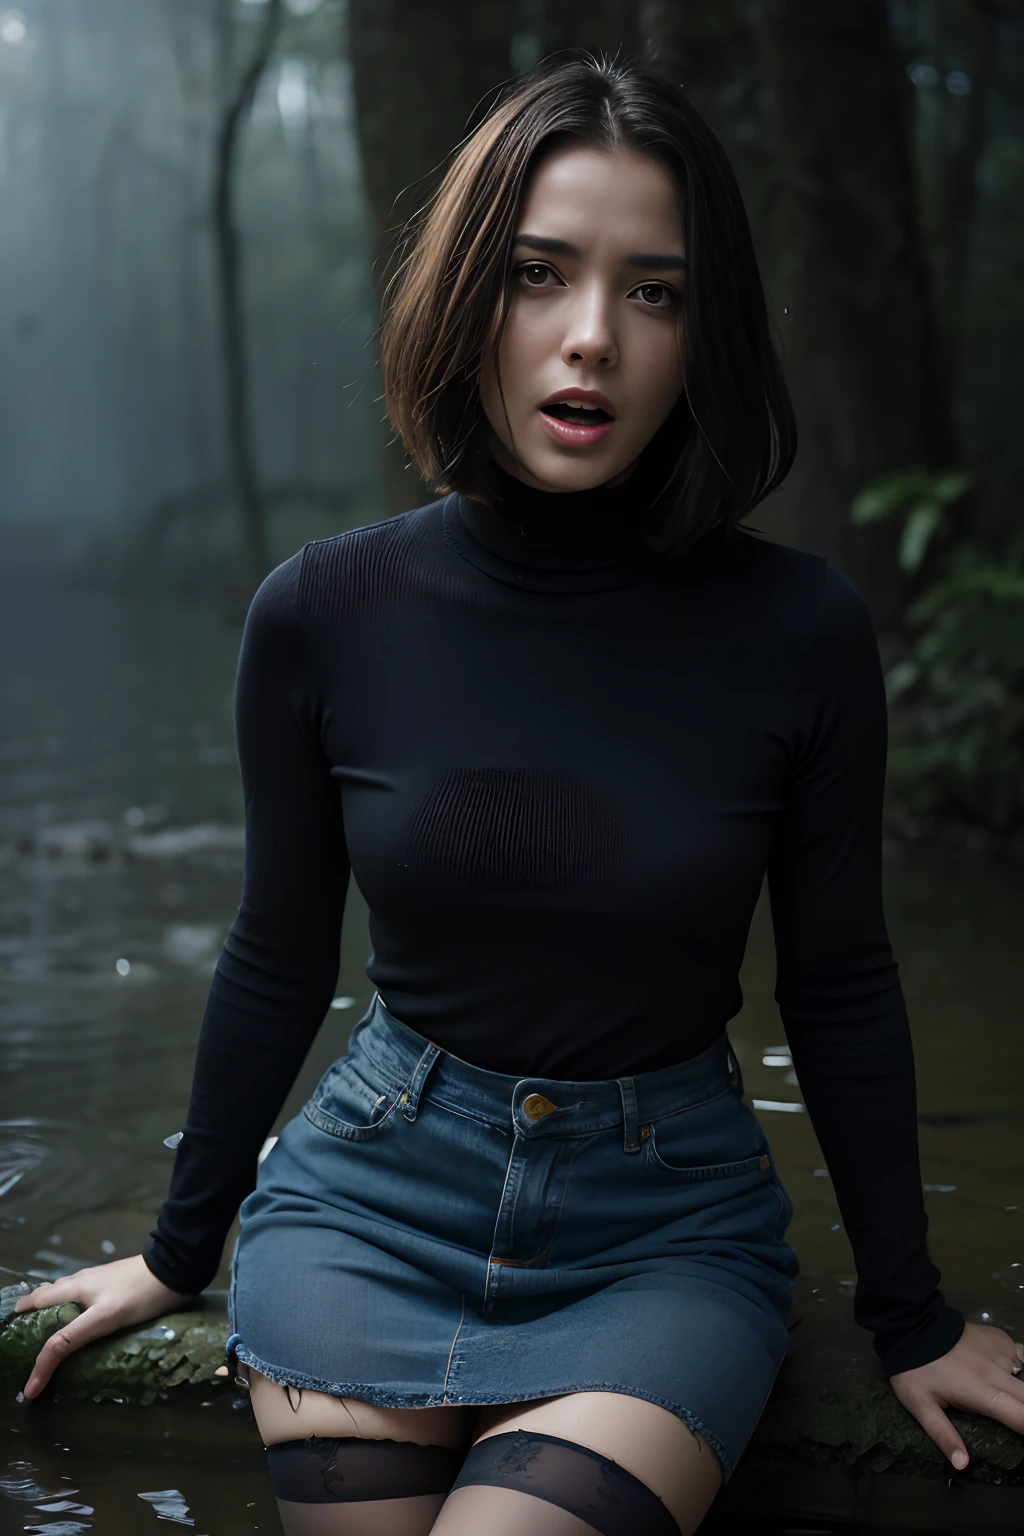 (Best Quality,hight resolution:1.2),The woman,Expressive wrinkles,Bob haircut,jeans skirt,blouse,(dark lace stockings with garters), ( drowning in a swamp:1.2),Detailed eyes and face,expression of despair,Dark and moody lighting,ominous vibe,desperation,(Imminent Doom:1.1),At the mercy of forbidden desires, gloomy ecstasy